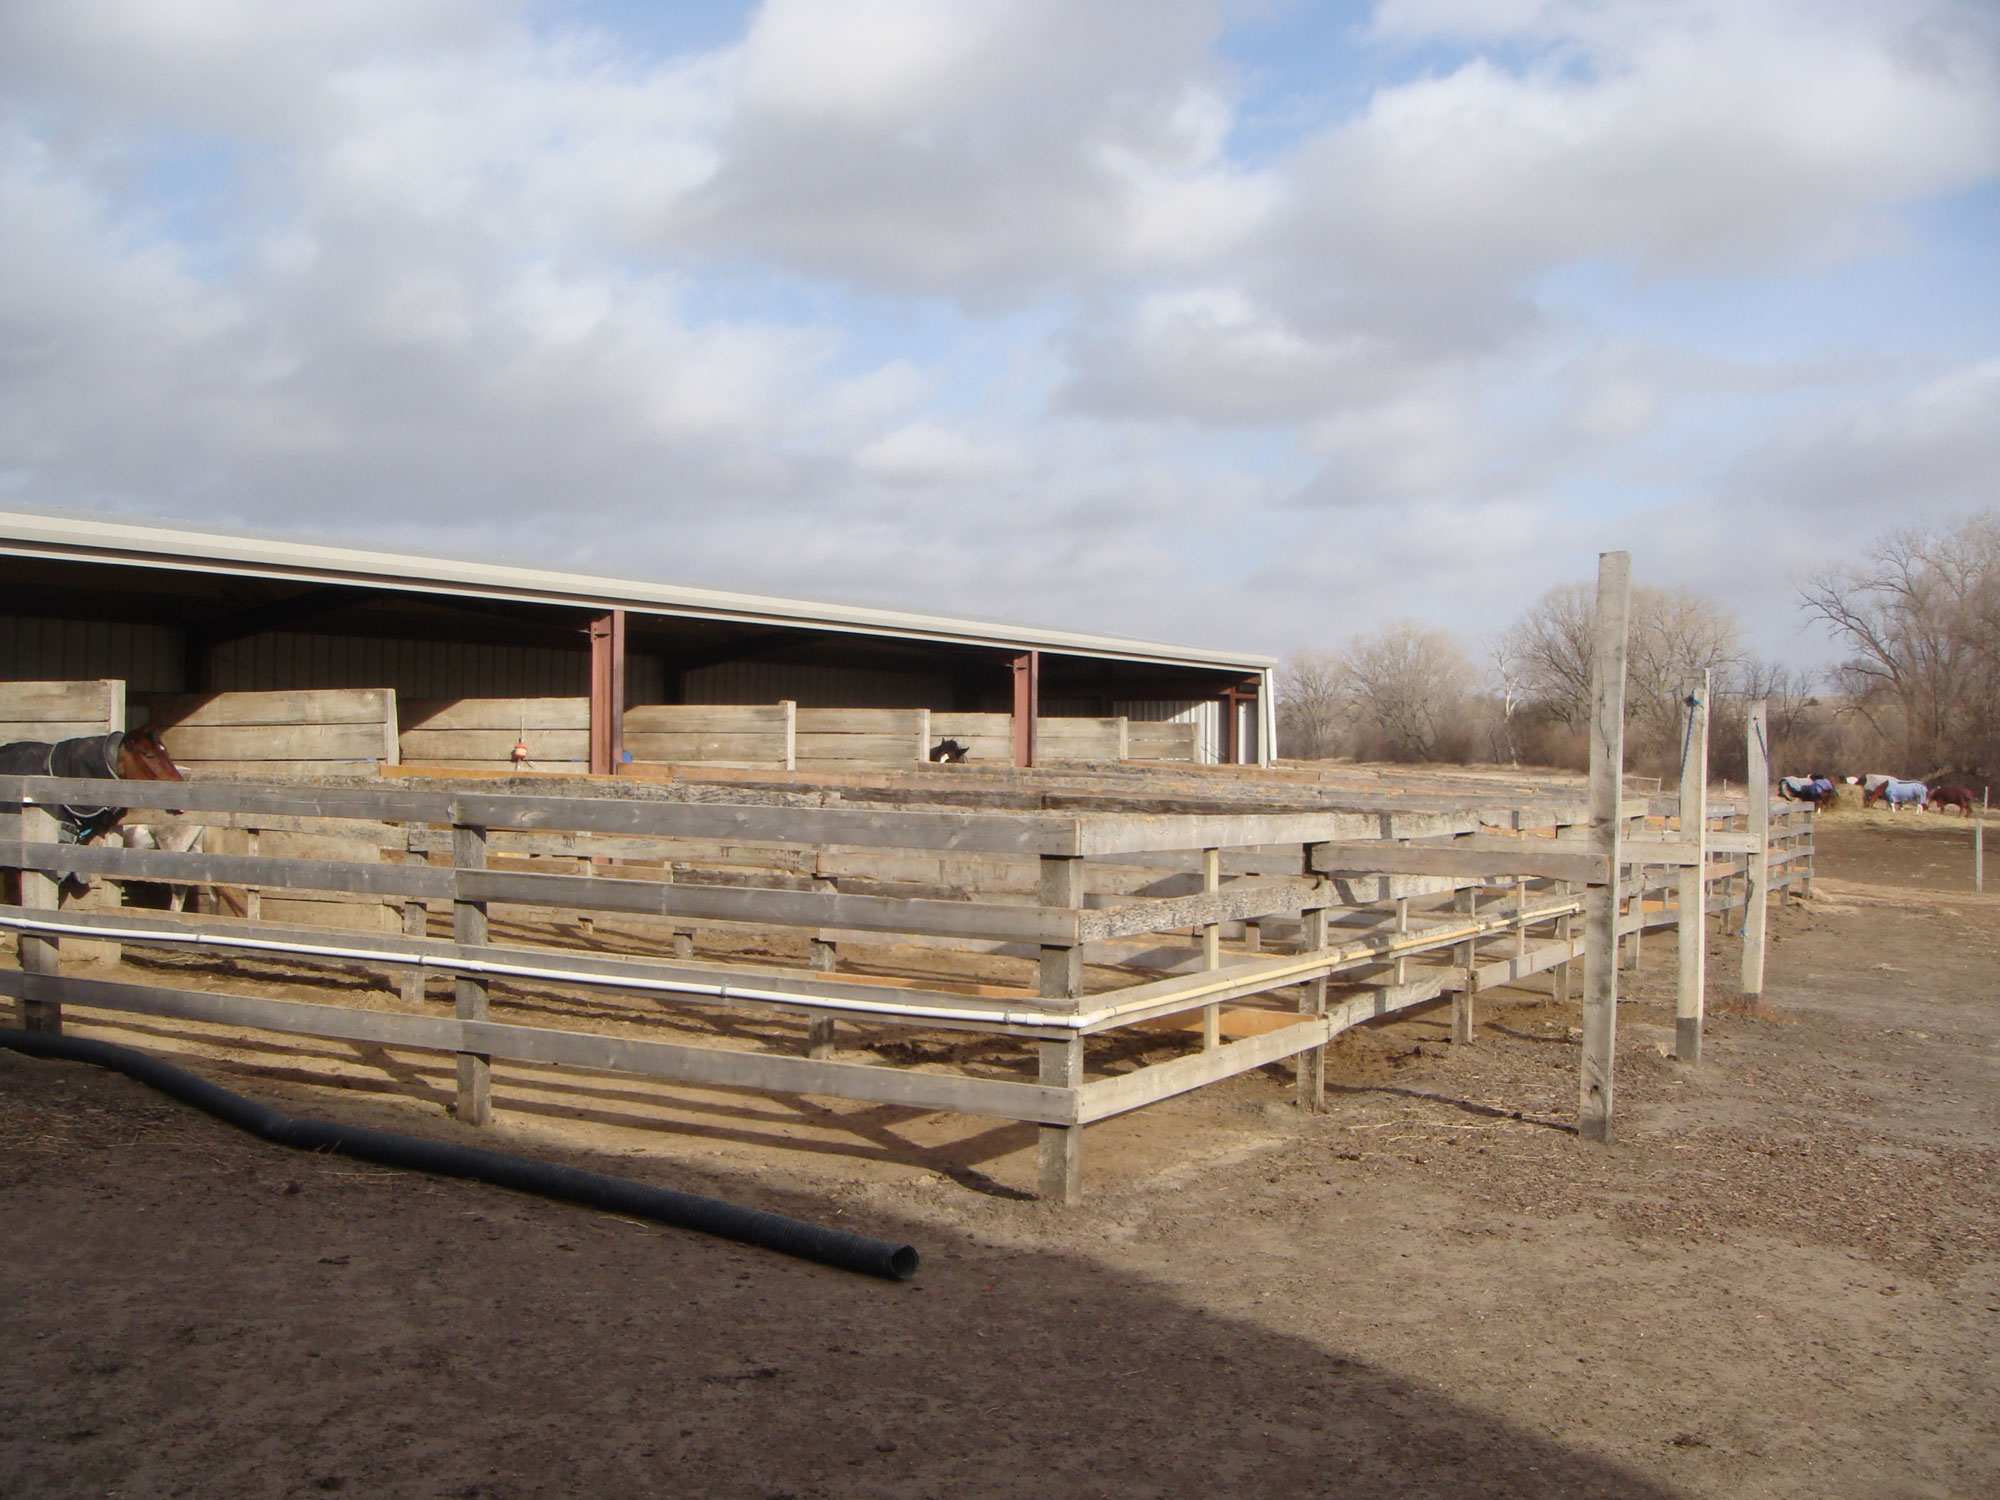 Outdoor Stalls With Runs